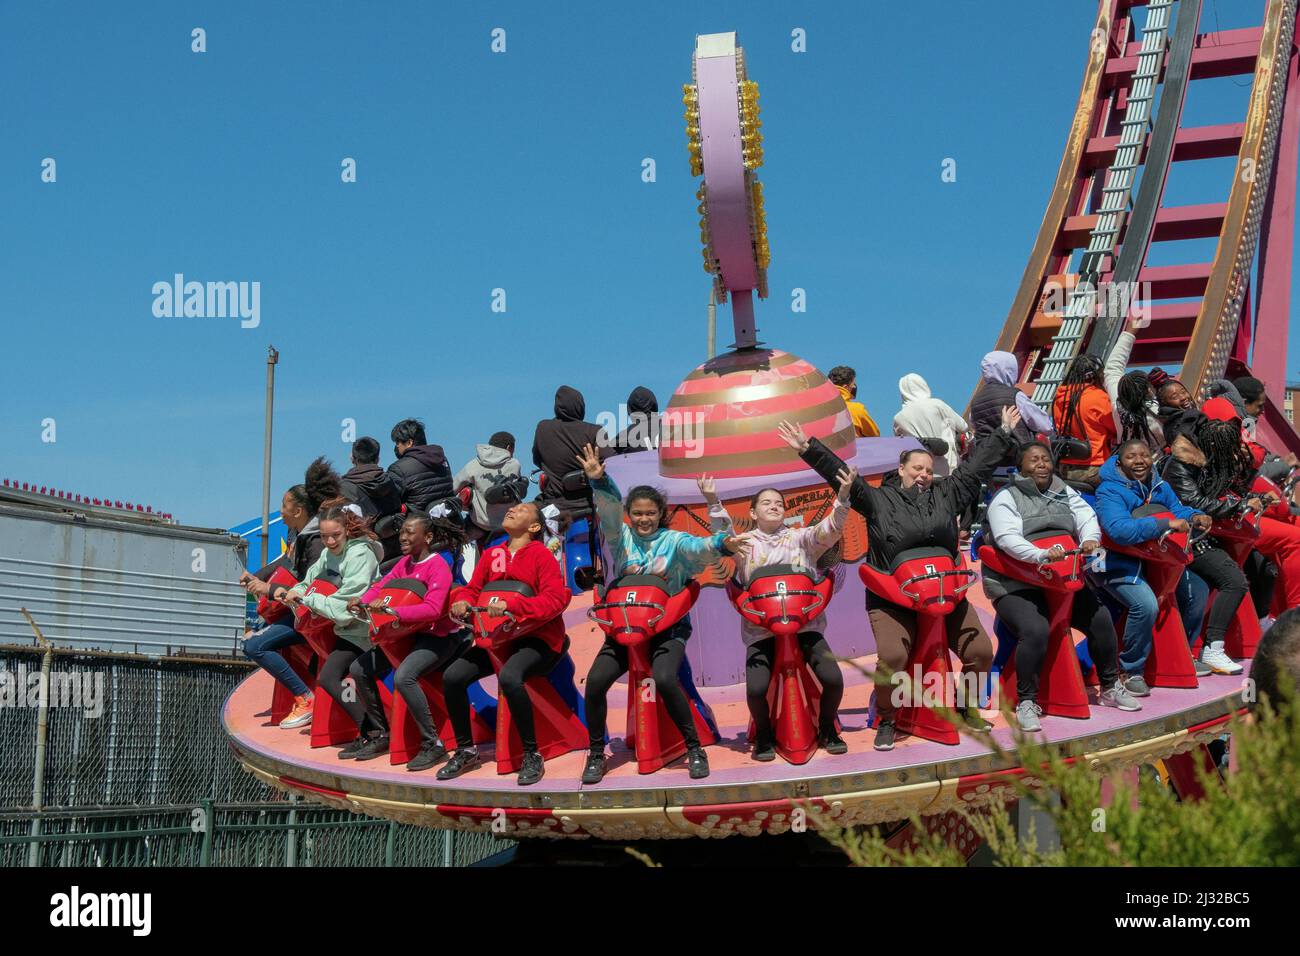 Young women enjoy the Electro Spin ride in Luna Park on an early spring day. Coney Island, Brooklyn, New York, 2022. Stock Photo